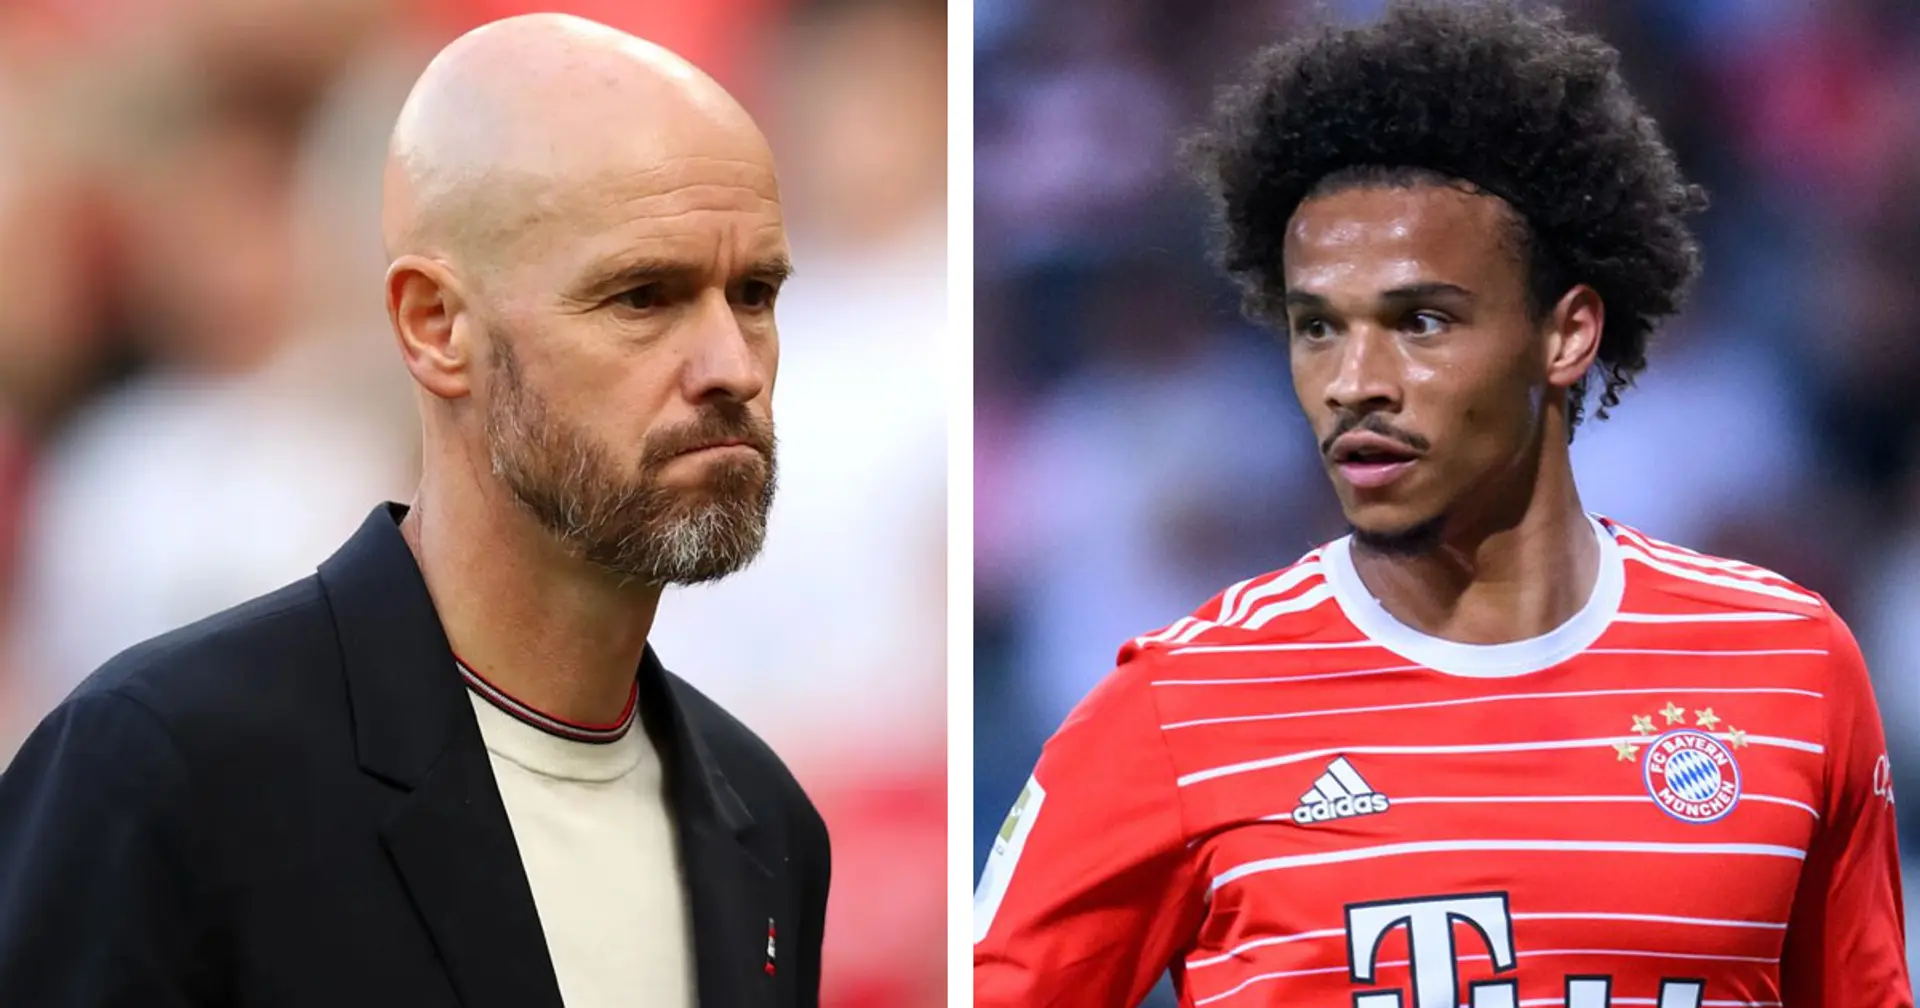 Leroy Sane's links to Man United squashed & 4 more big stories you might've missed